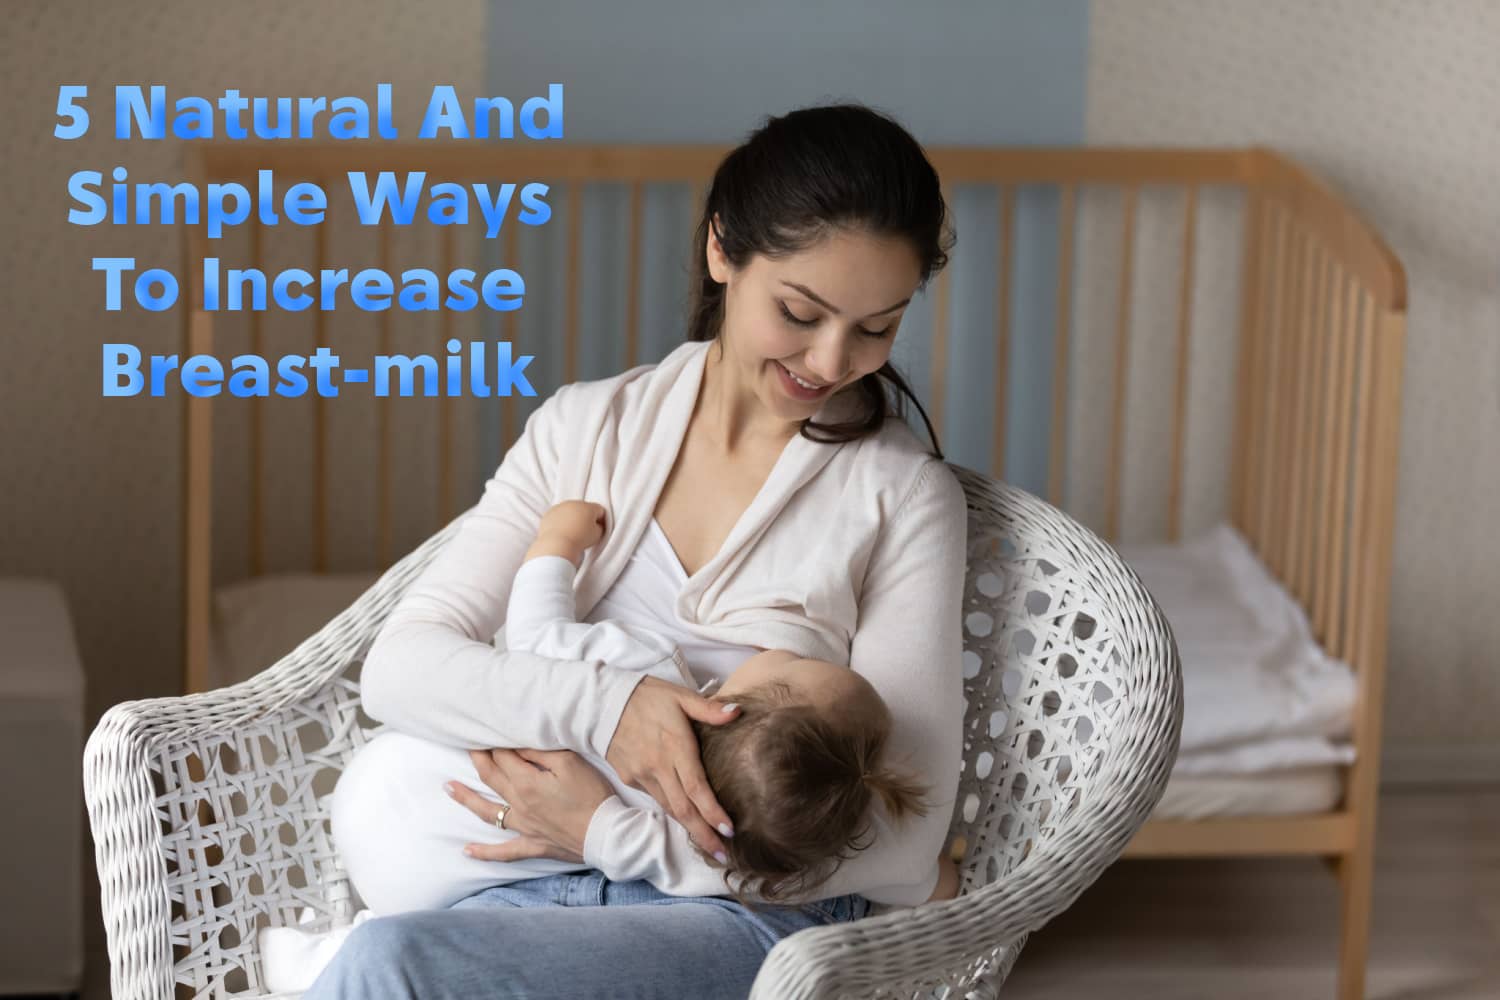 5 Natural And Simple Ways To Increase Breast-milk